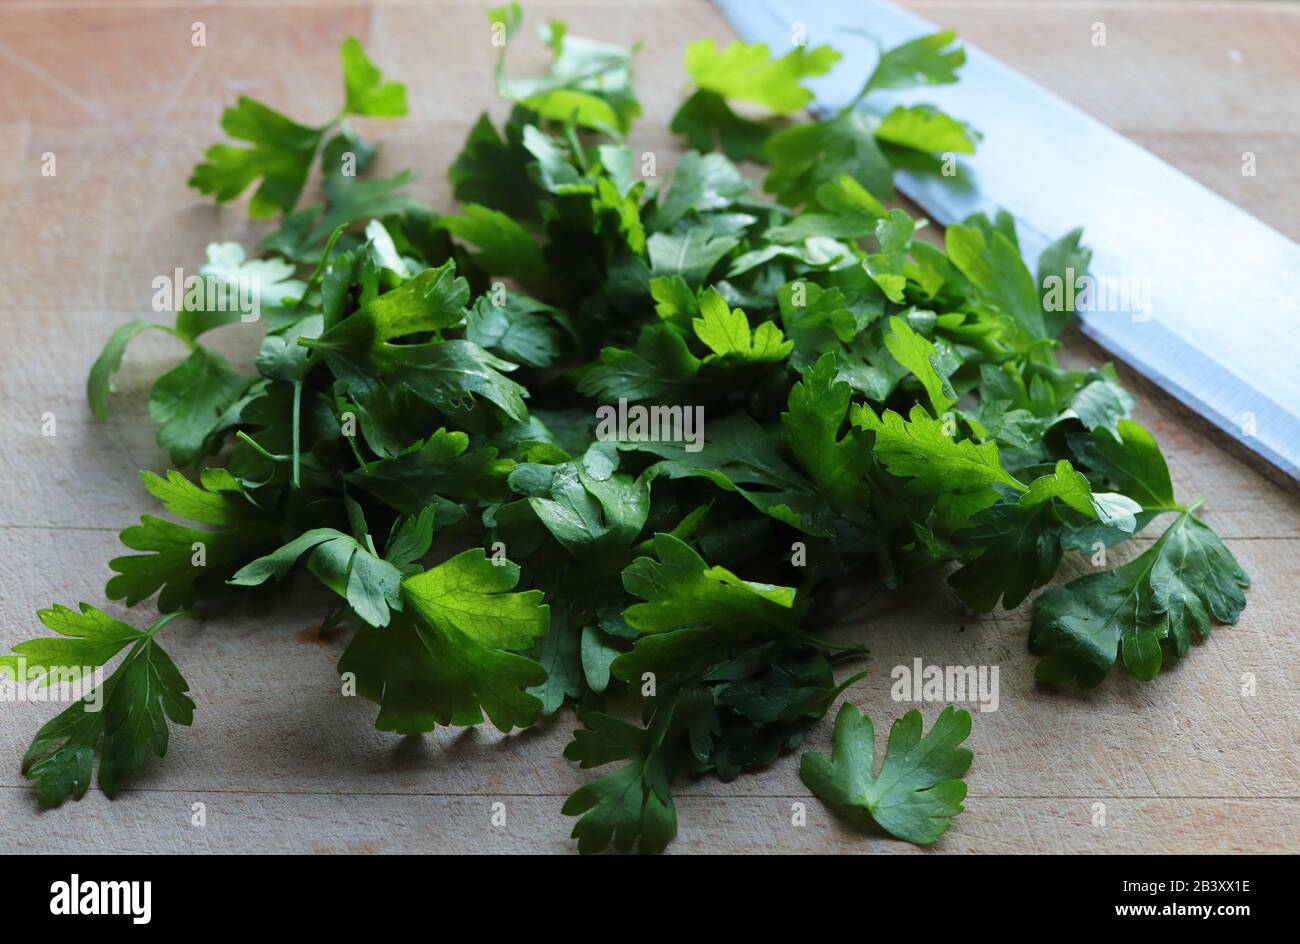 Parsley leaves on wood chopping board with large knife Stock Photo